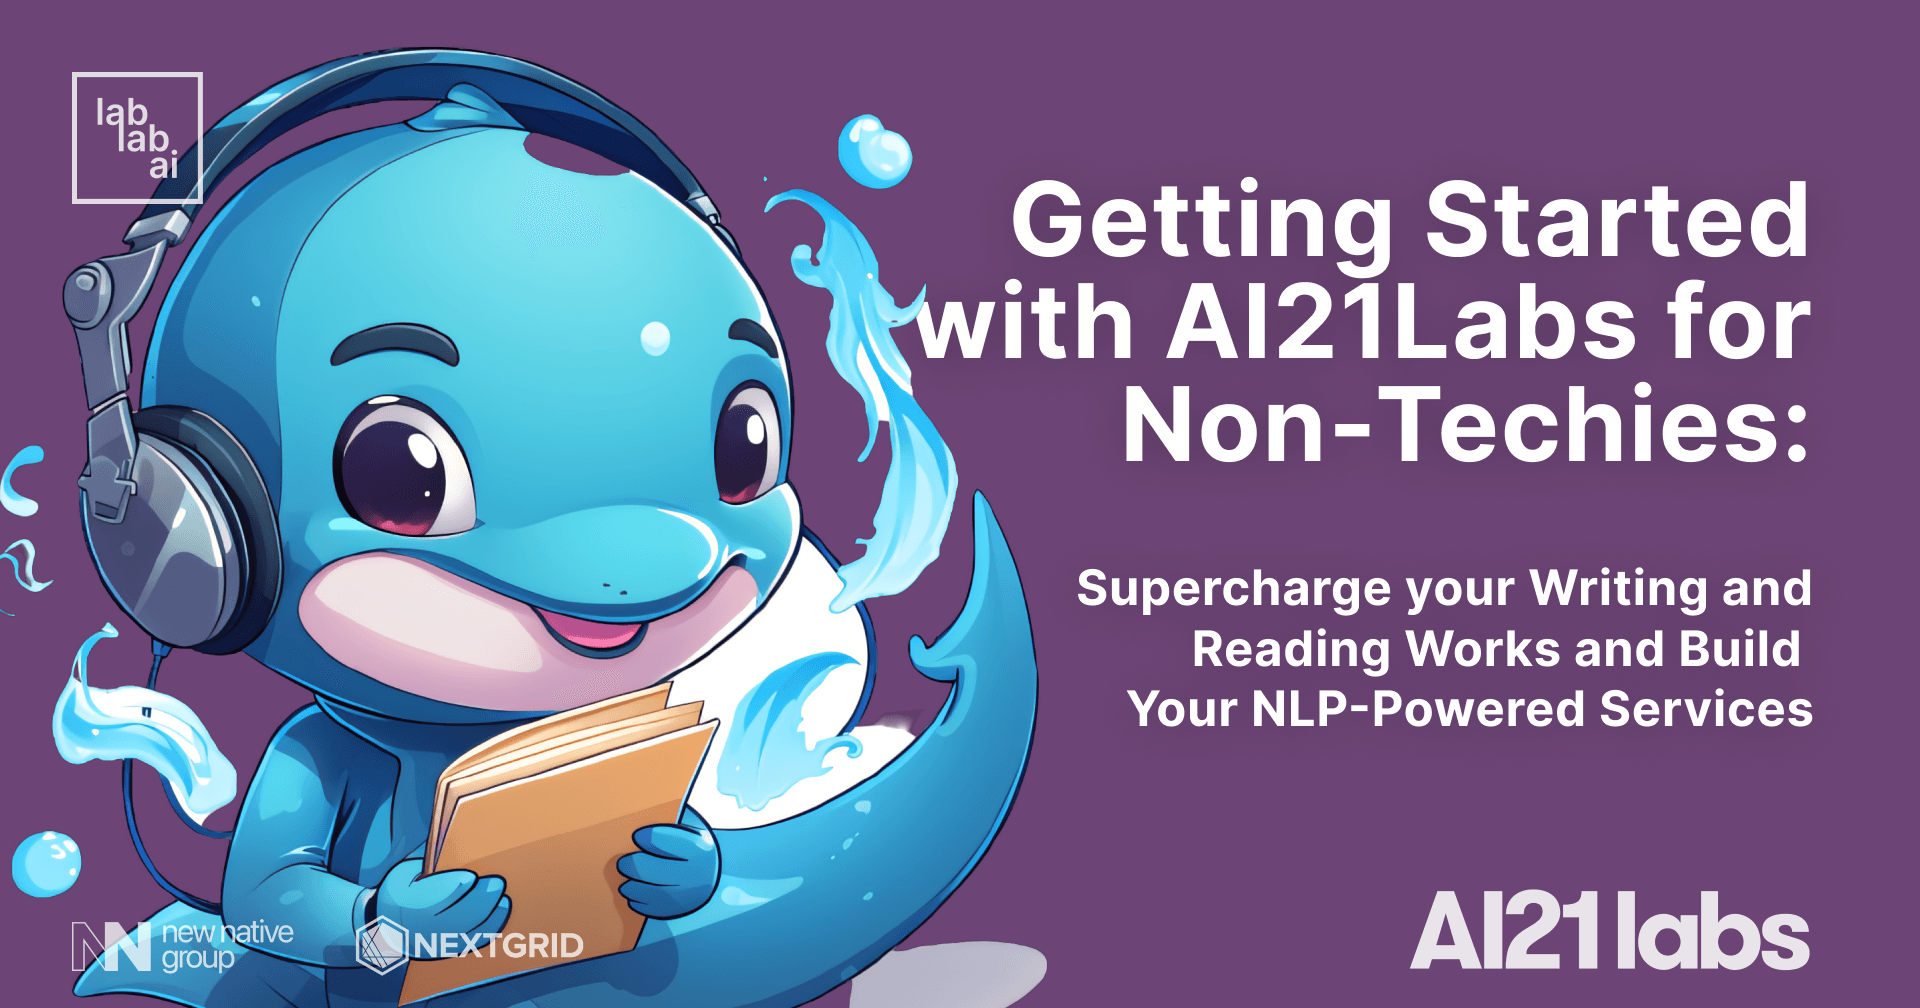 Getting Started with AI21Labs for Non-Techies: Supercharge your Writing and Reading Works and Build Your NLP-Powered Services